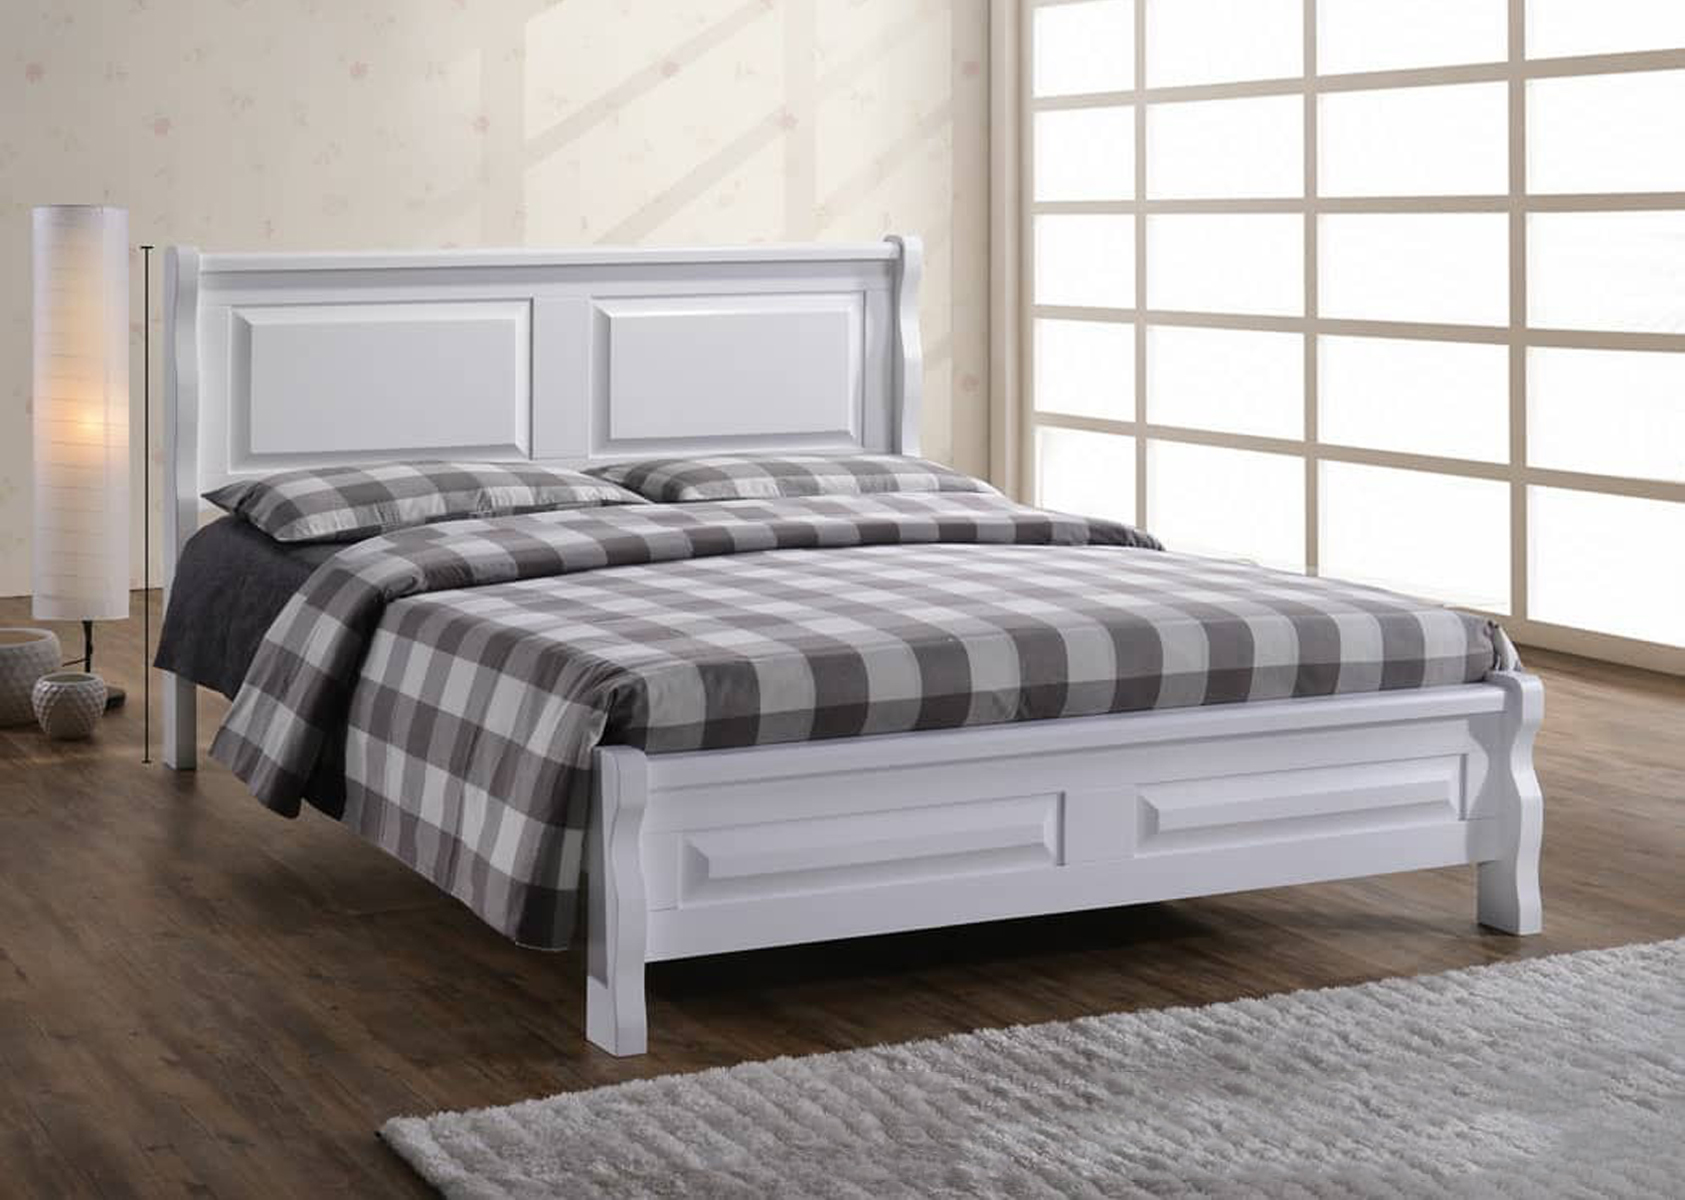 VICTORIA full solid wood queen size bed frame-White - FurnitureDirect ...